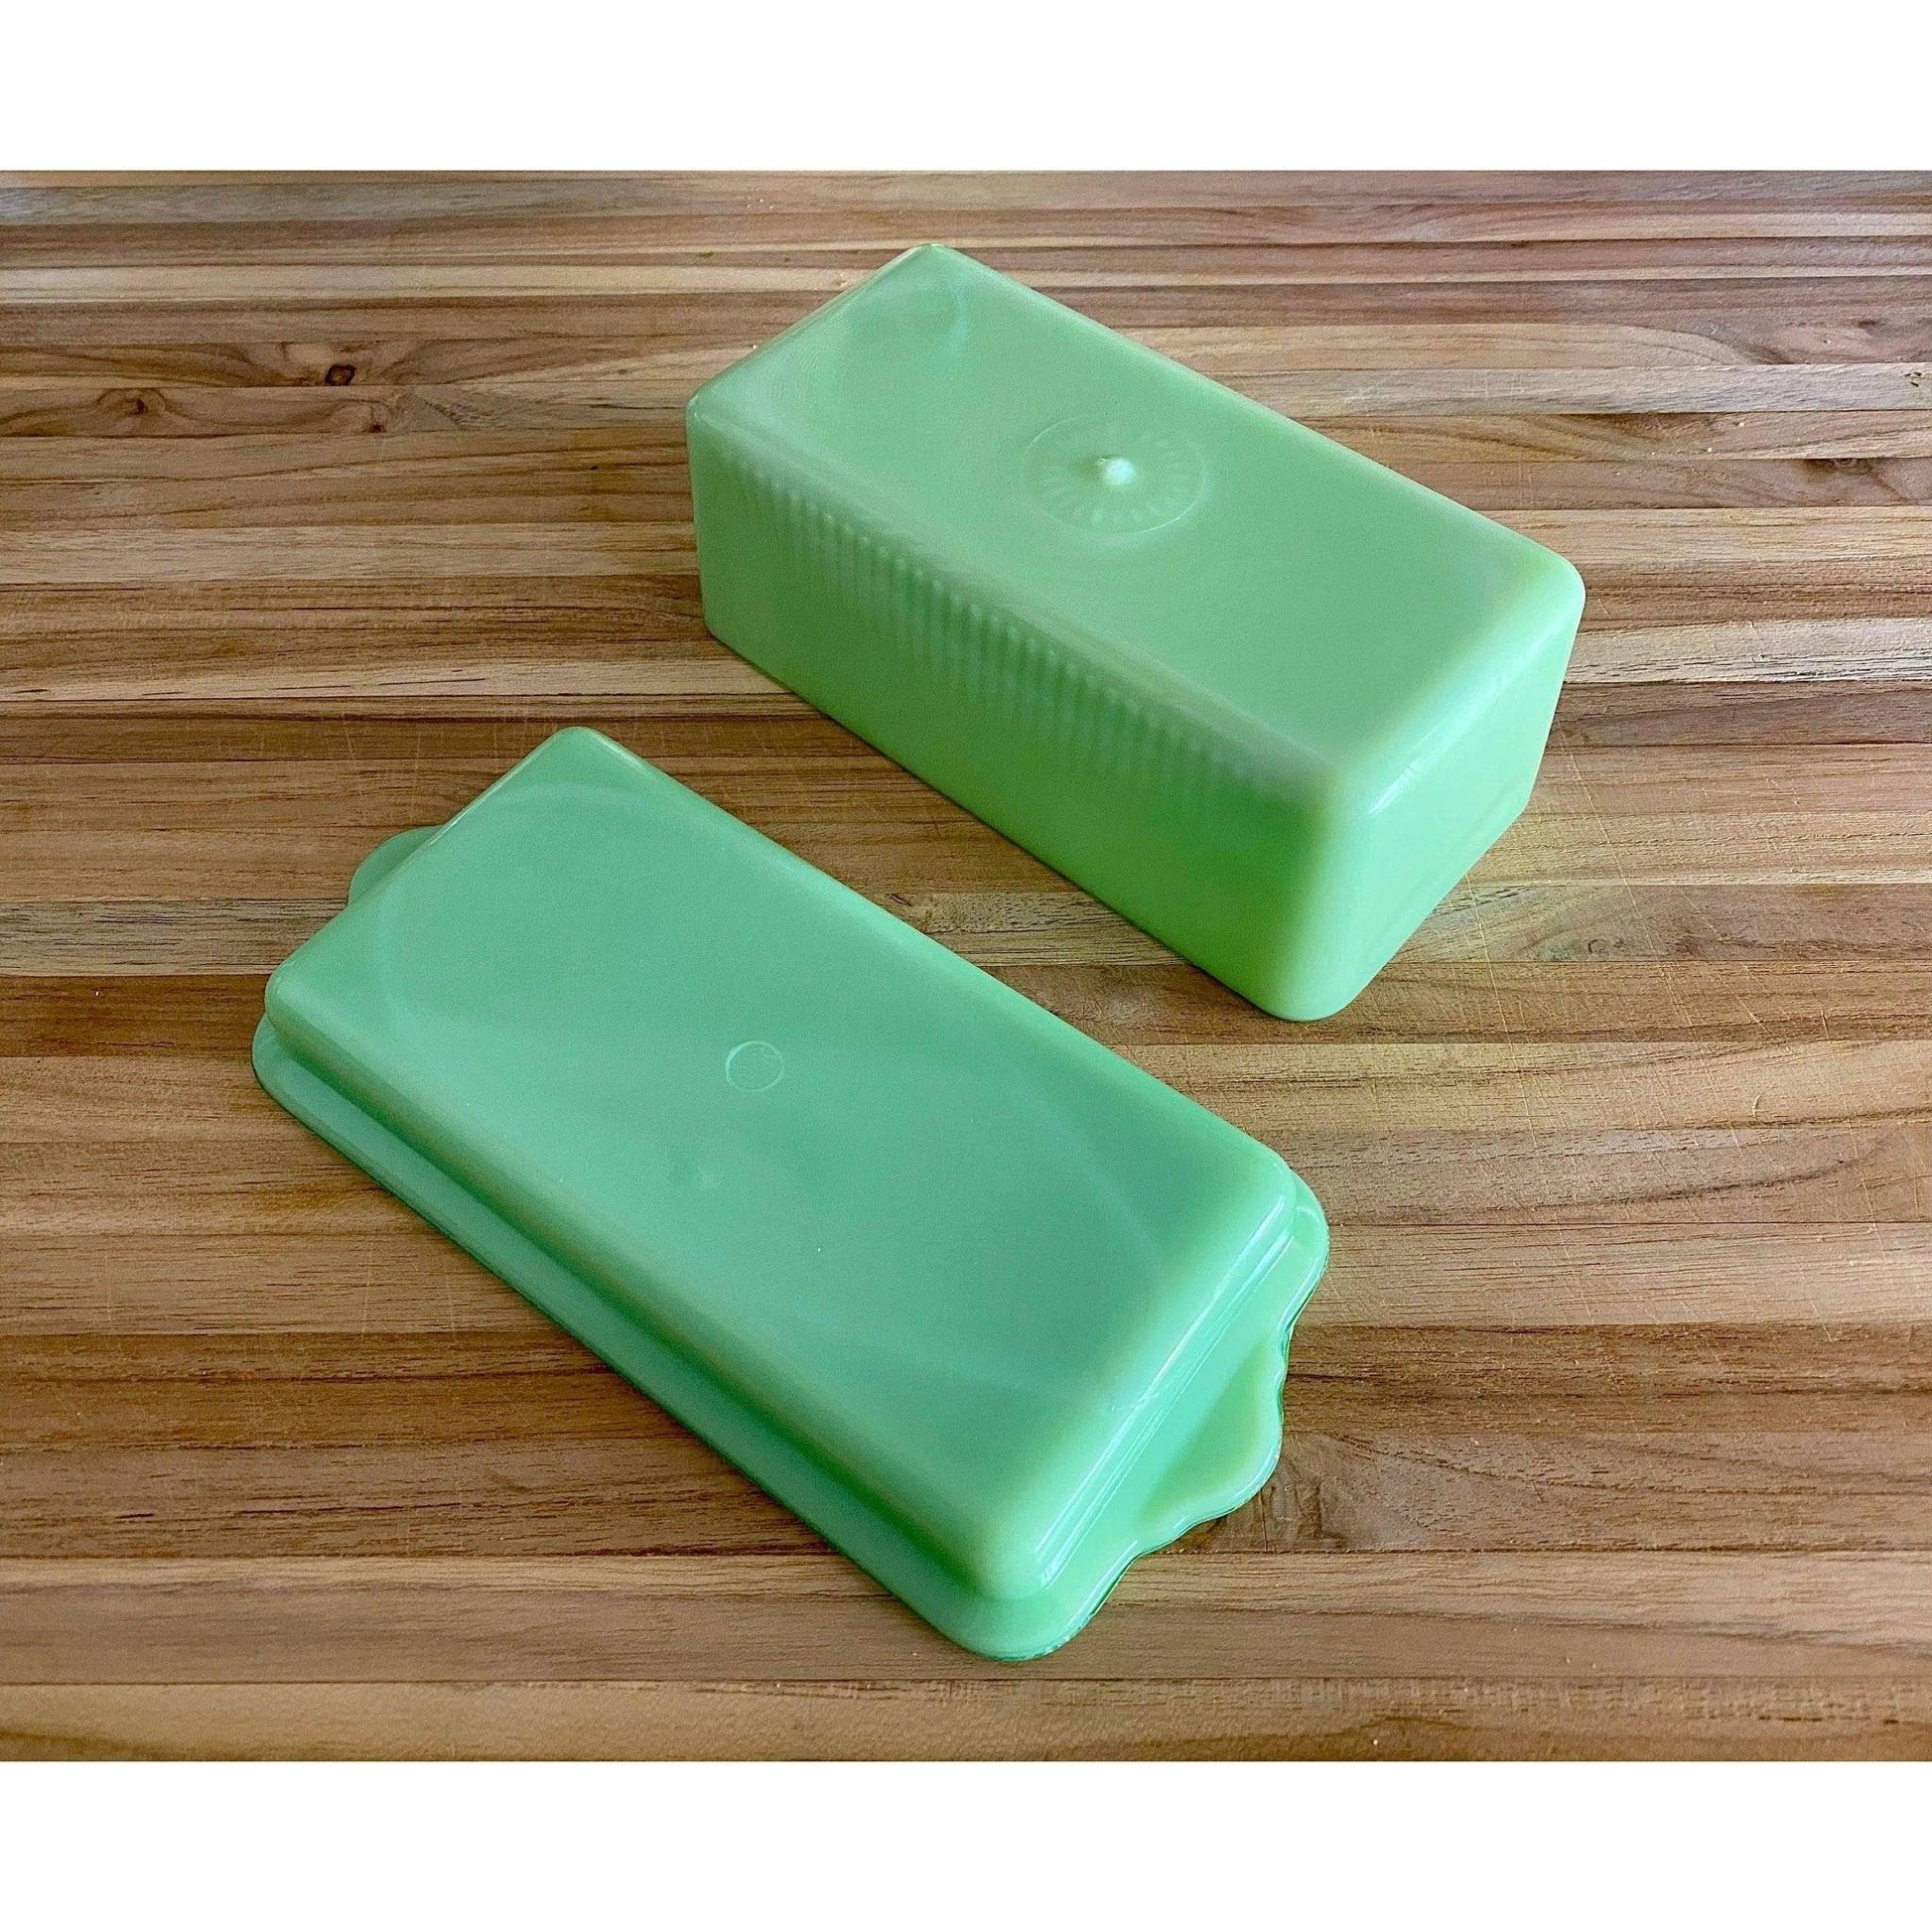 Glass Collectibles: McKee Jadeite Covered Butter Dish